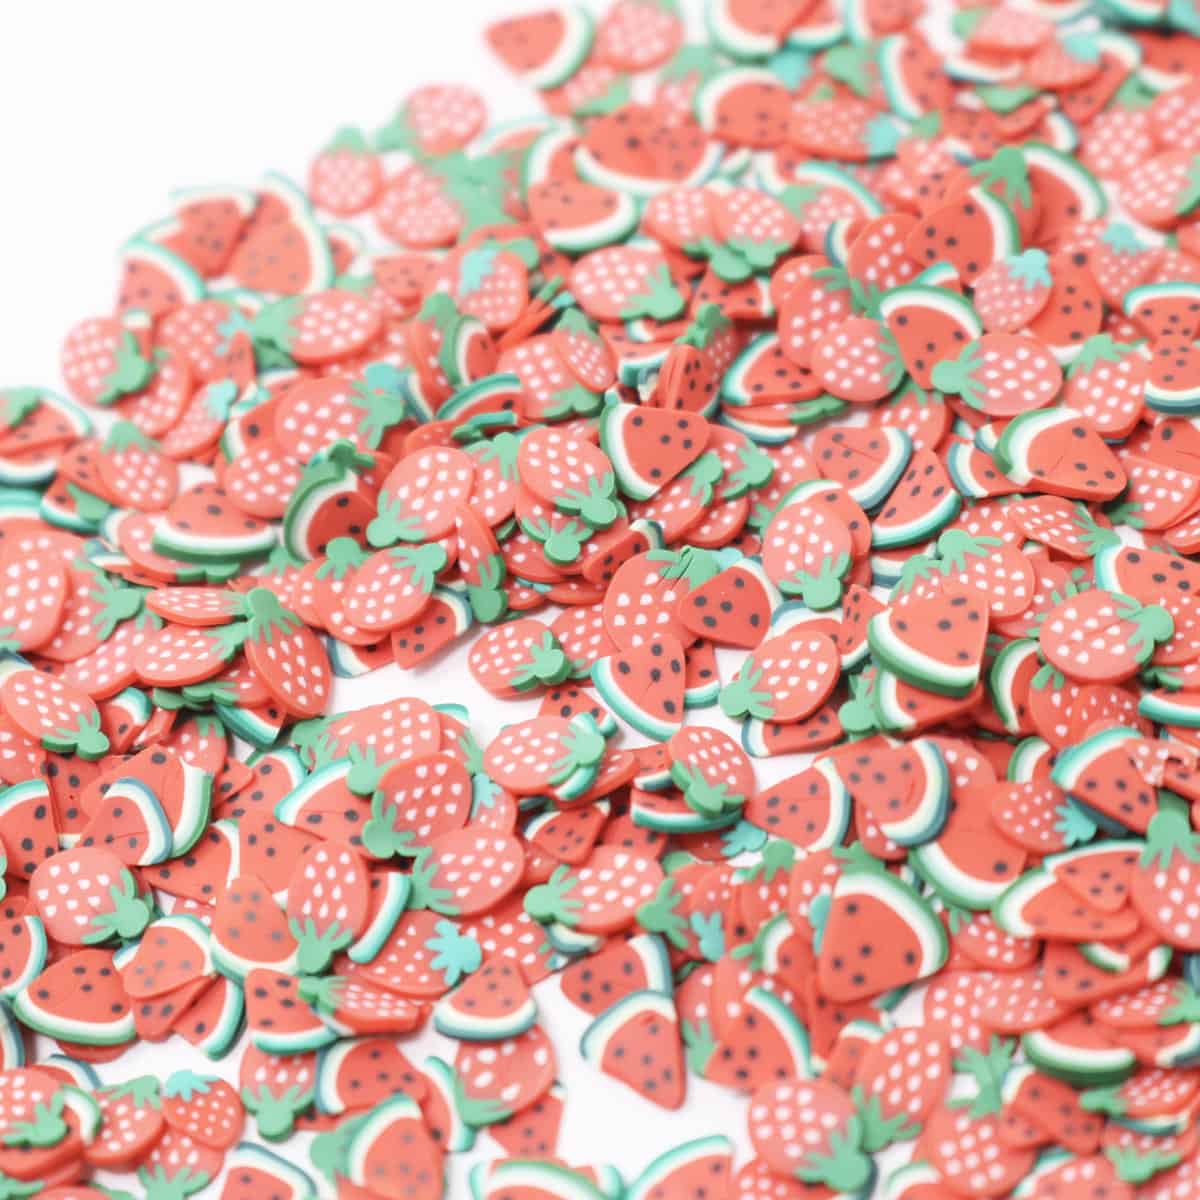 Strawberry and watermelon sprinkles